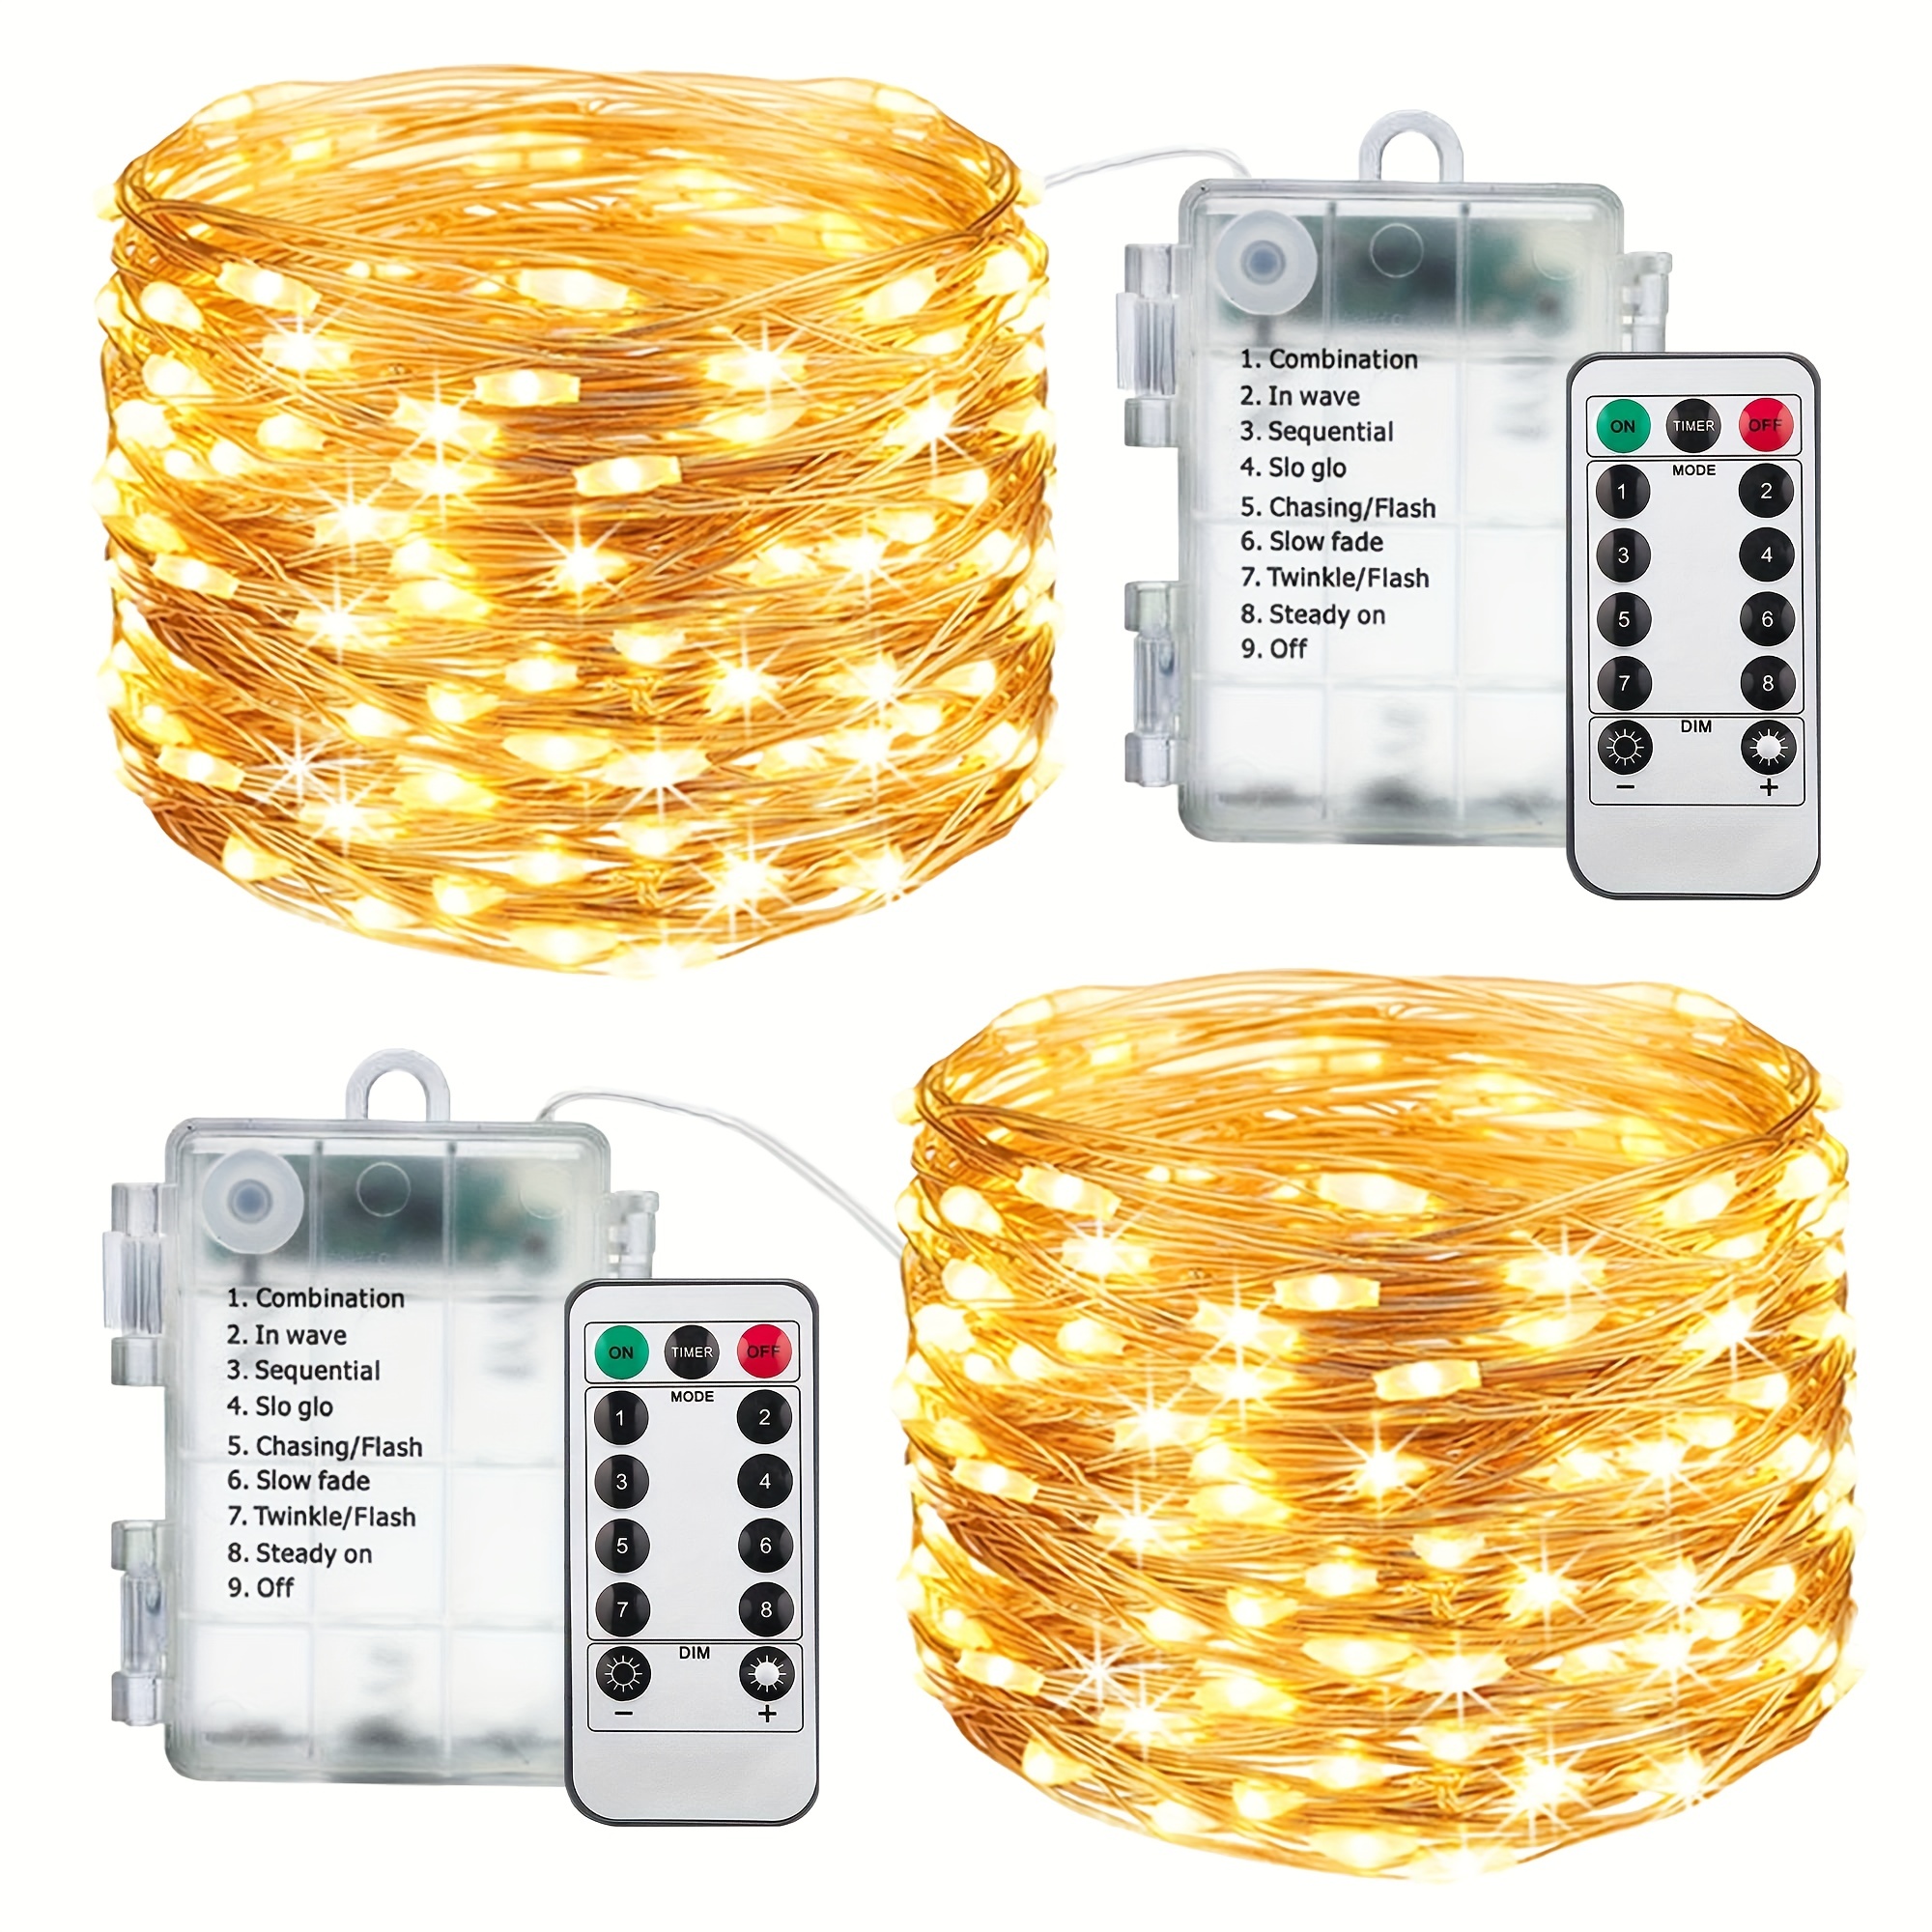 YoTelim LED Fairy String Lights with Remote Control - 2 Set 100 LED  33ft/10m Micro Silver Wire Indoor Battery Operated LED String Lights for  Garden